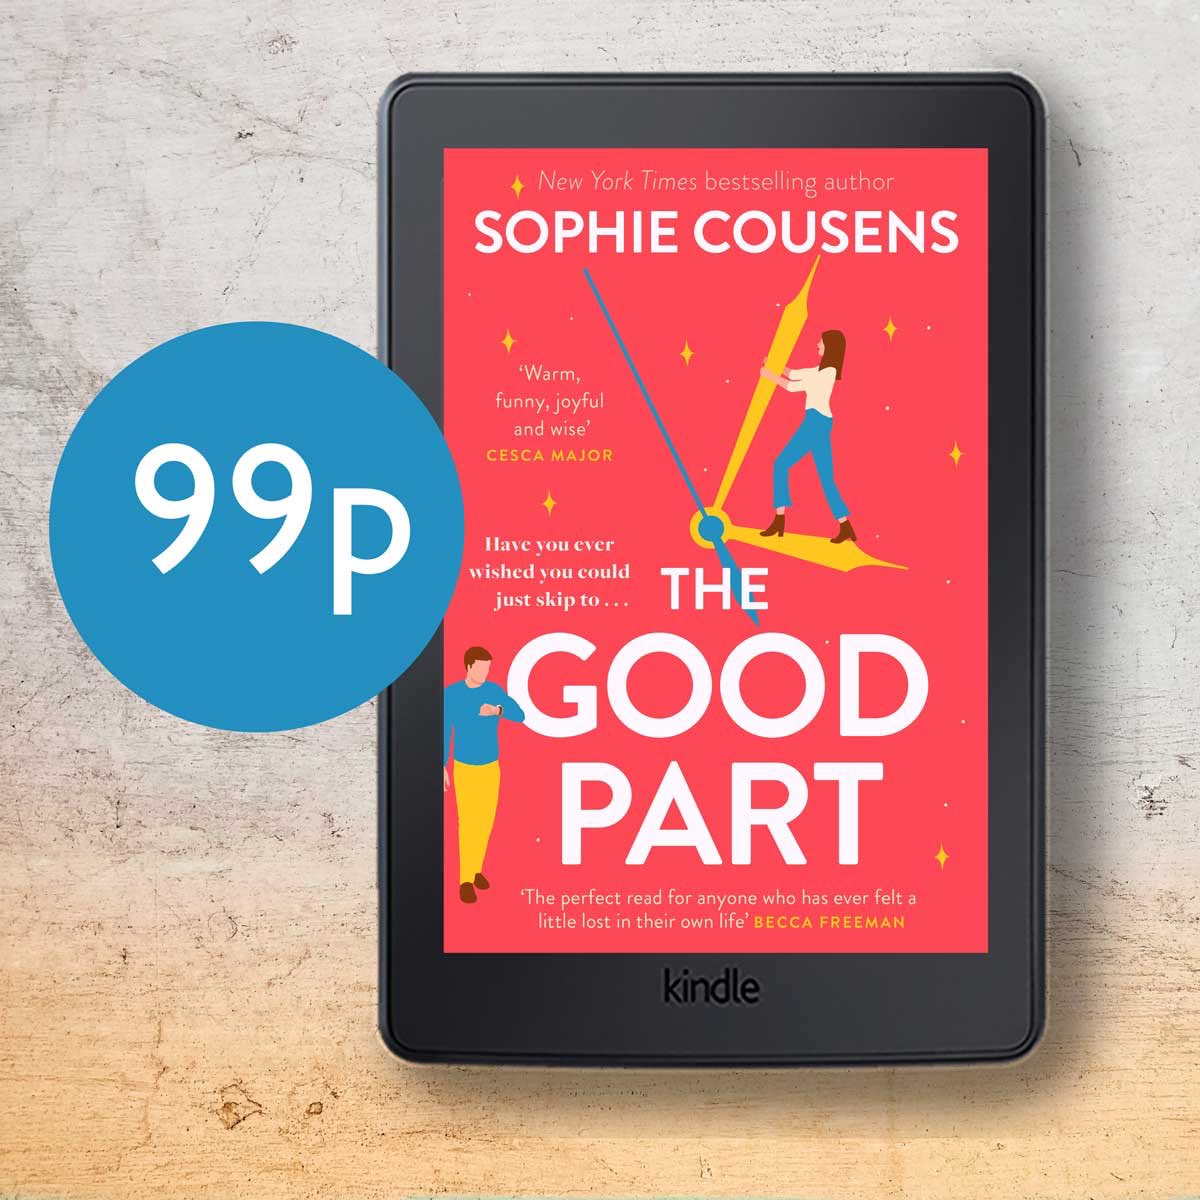 Still just 99p in the U.K. this month.